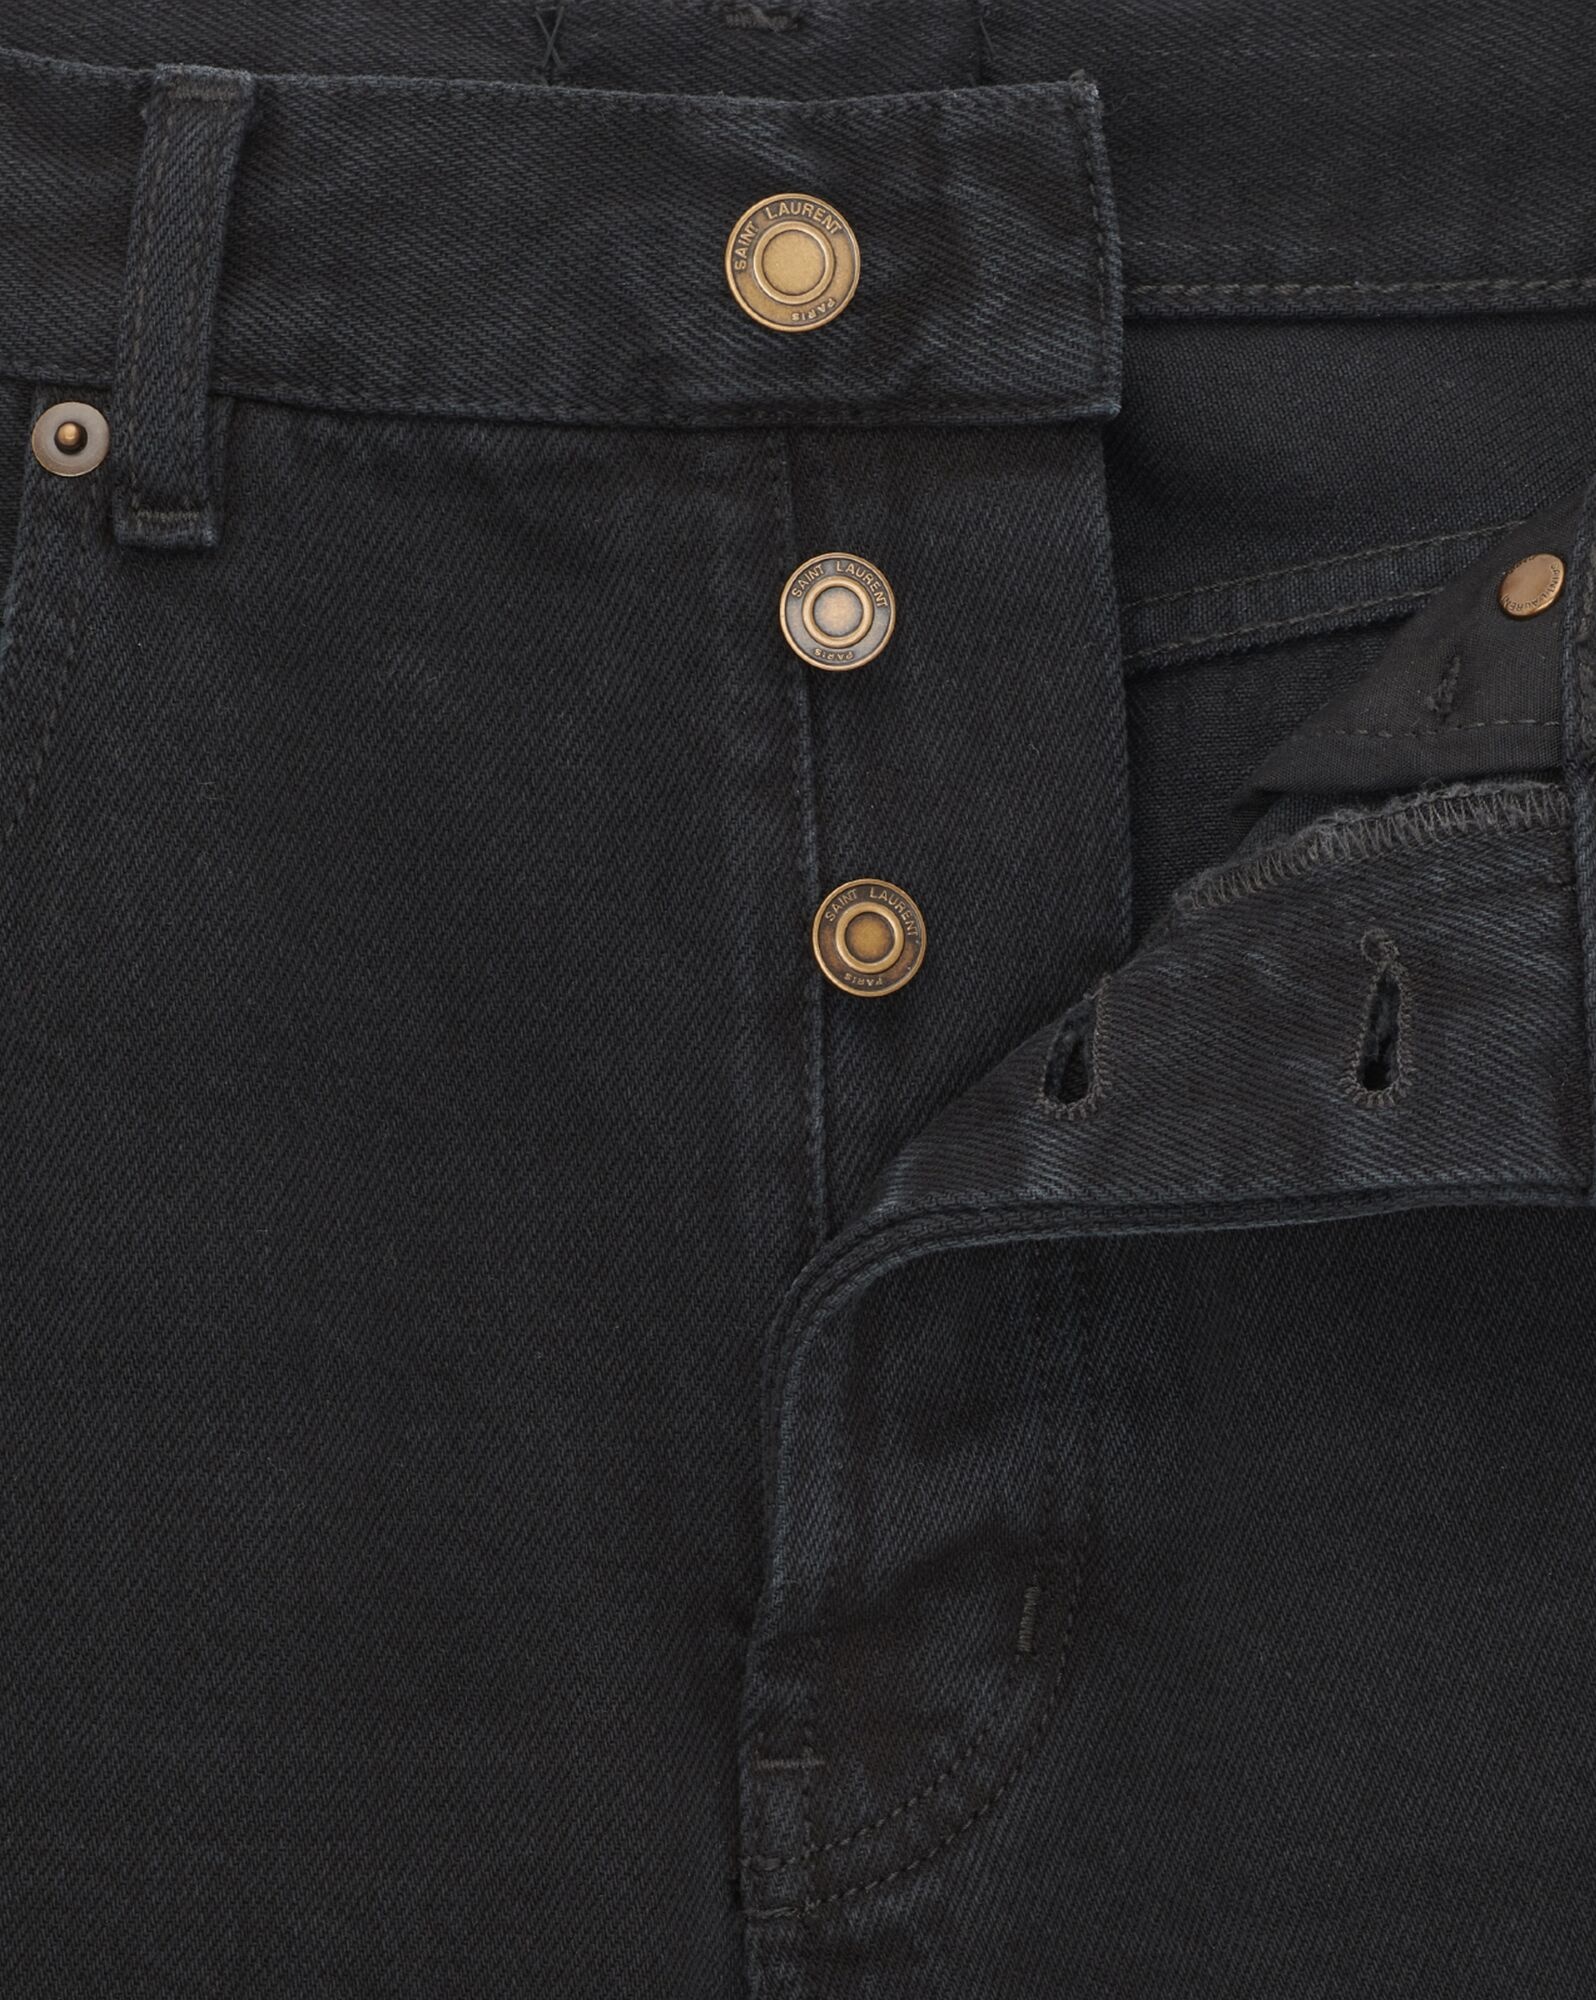 long extreme baggy jeans in carbon black denim - 4